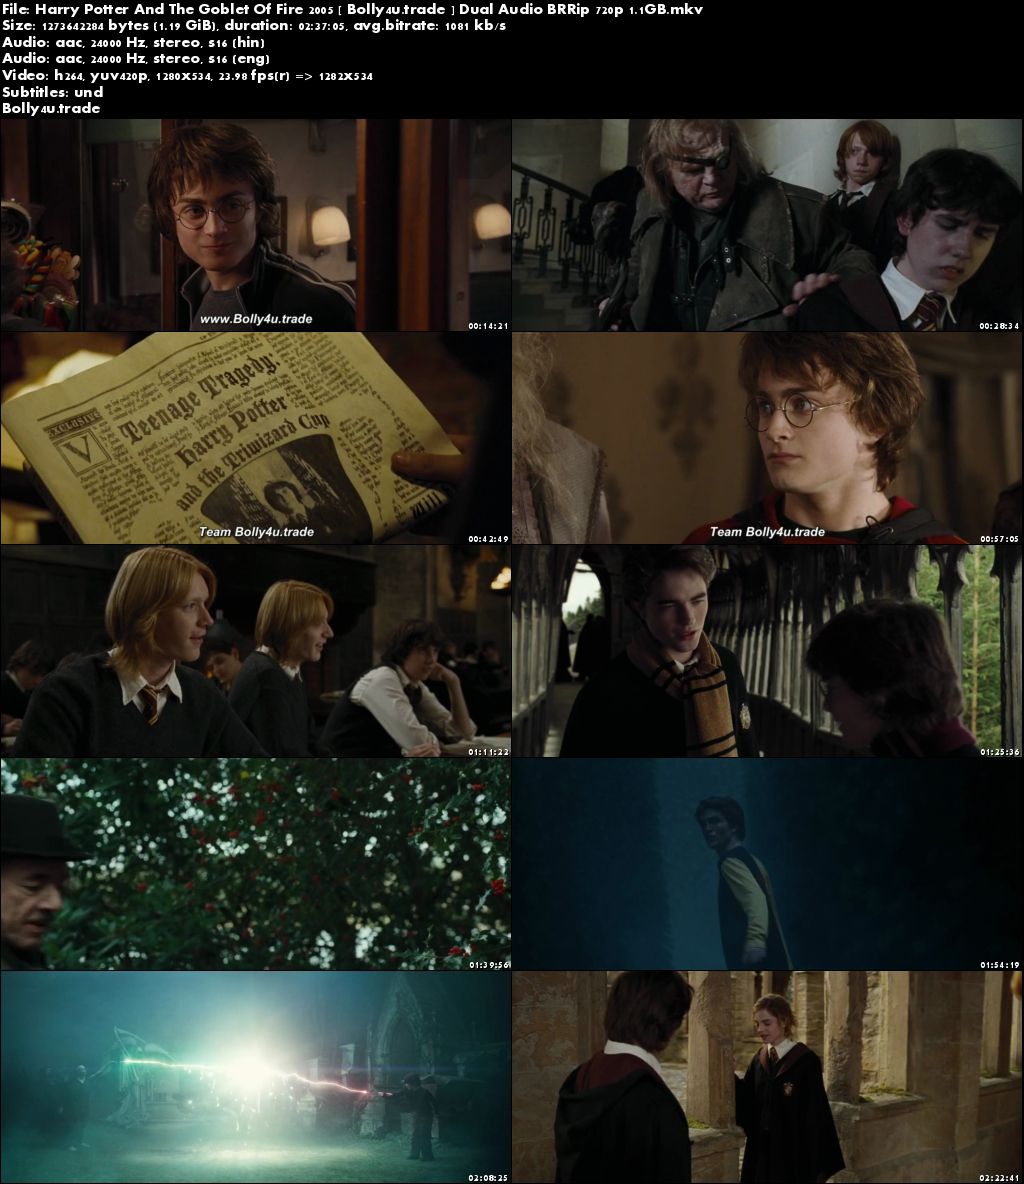 Harry Potter And The Goblet Of Fire 2005 BRRip 500Mb Hindi Dual Audio 480p Download